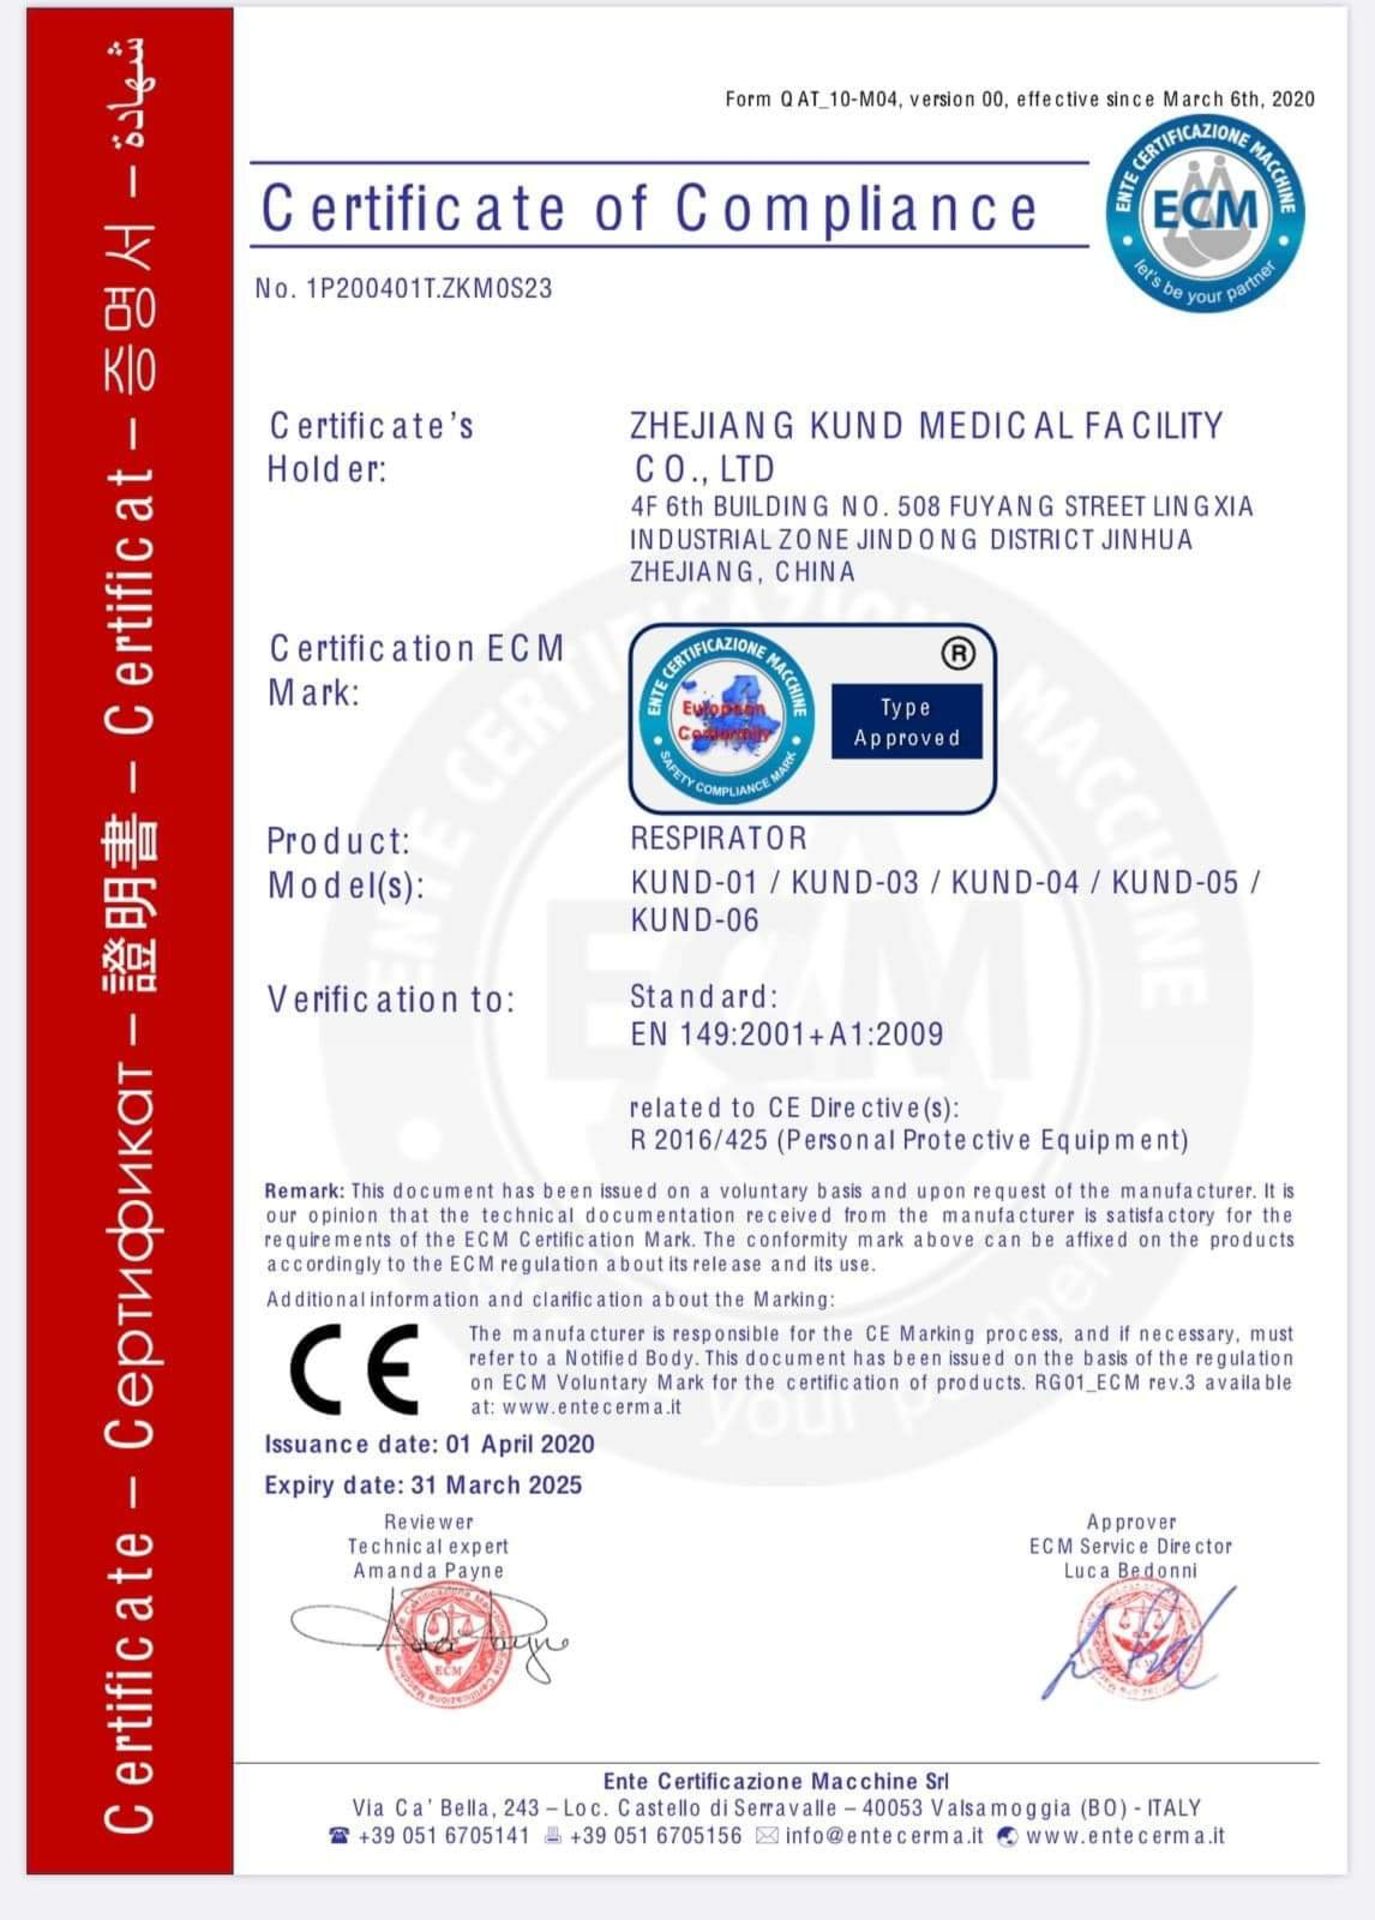 5000 KN95 FILTERED FACE MASKS, BRAND NEW WITH TAGS AND CE MARK CERTIFIED *PLUS VAT* - Image 7 of 7